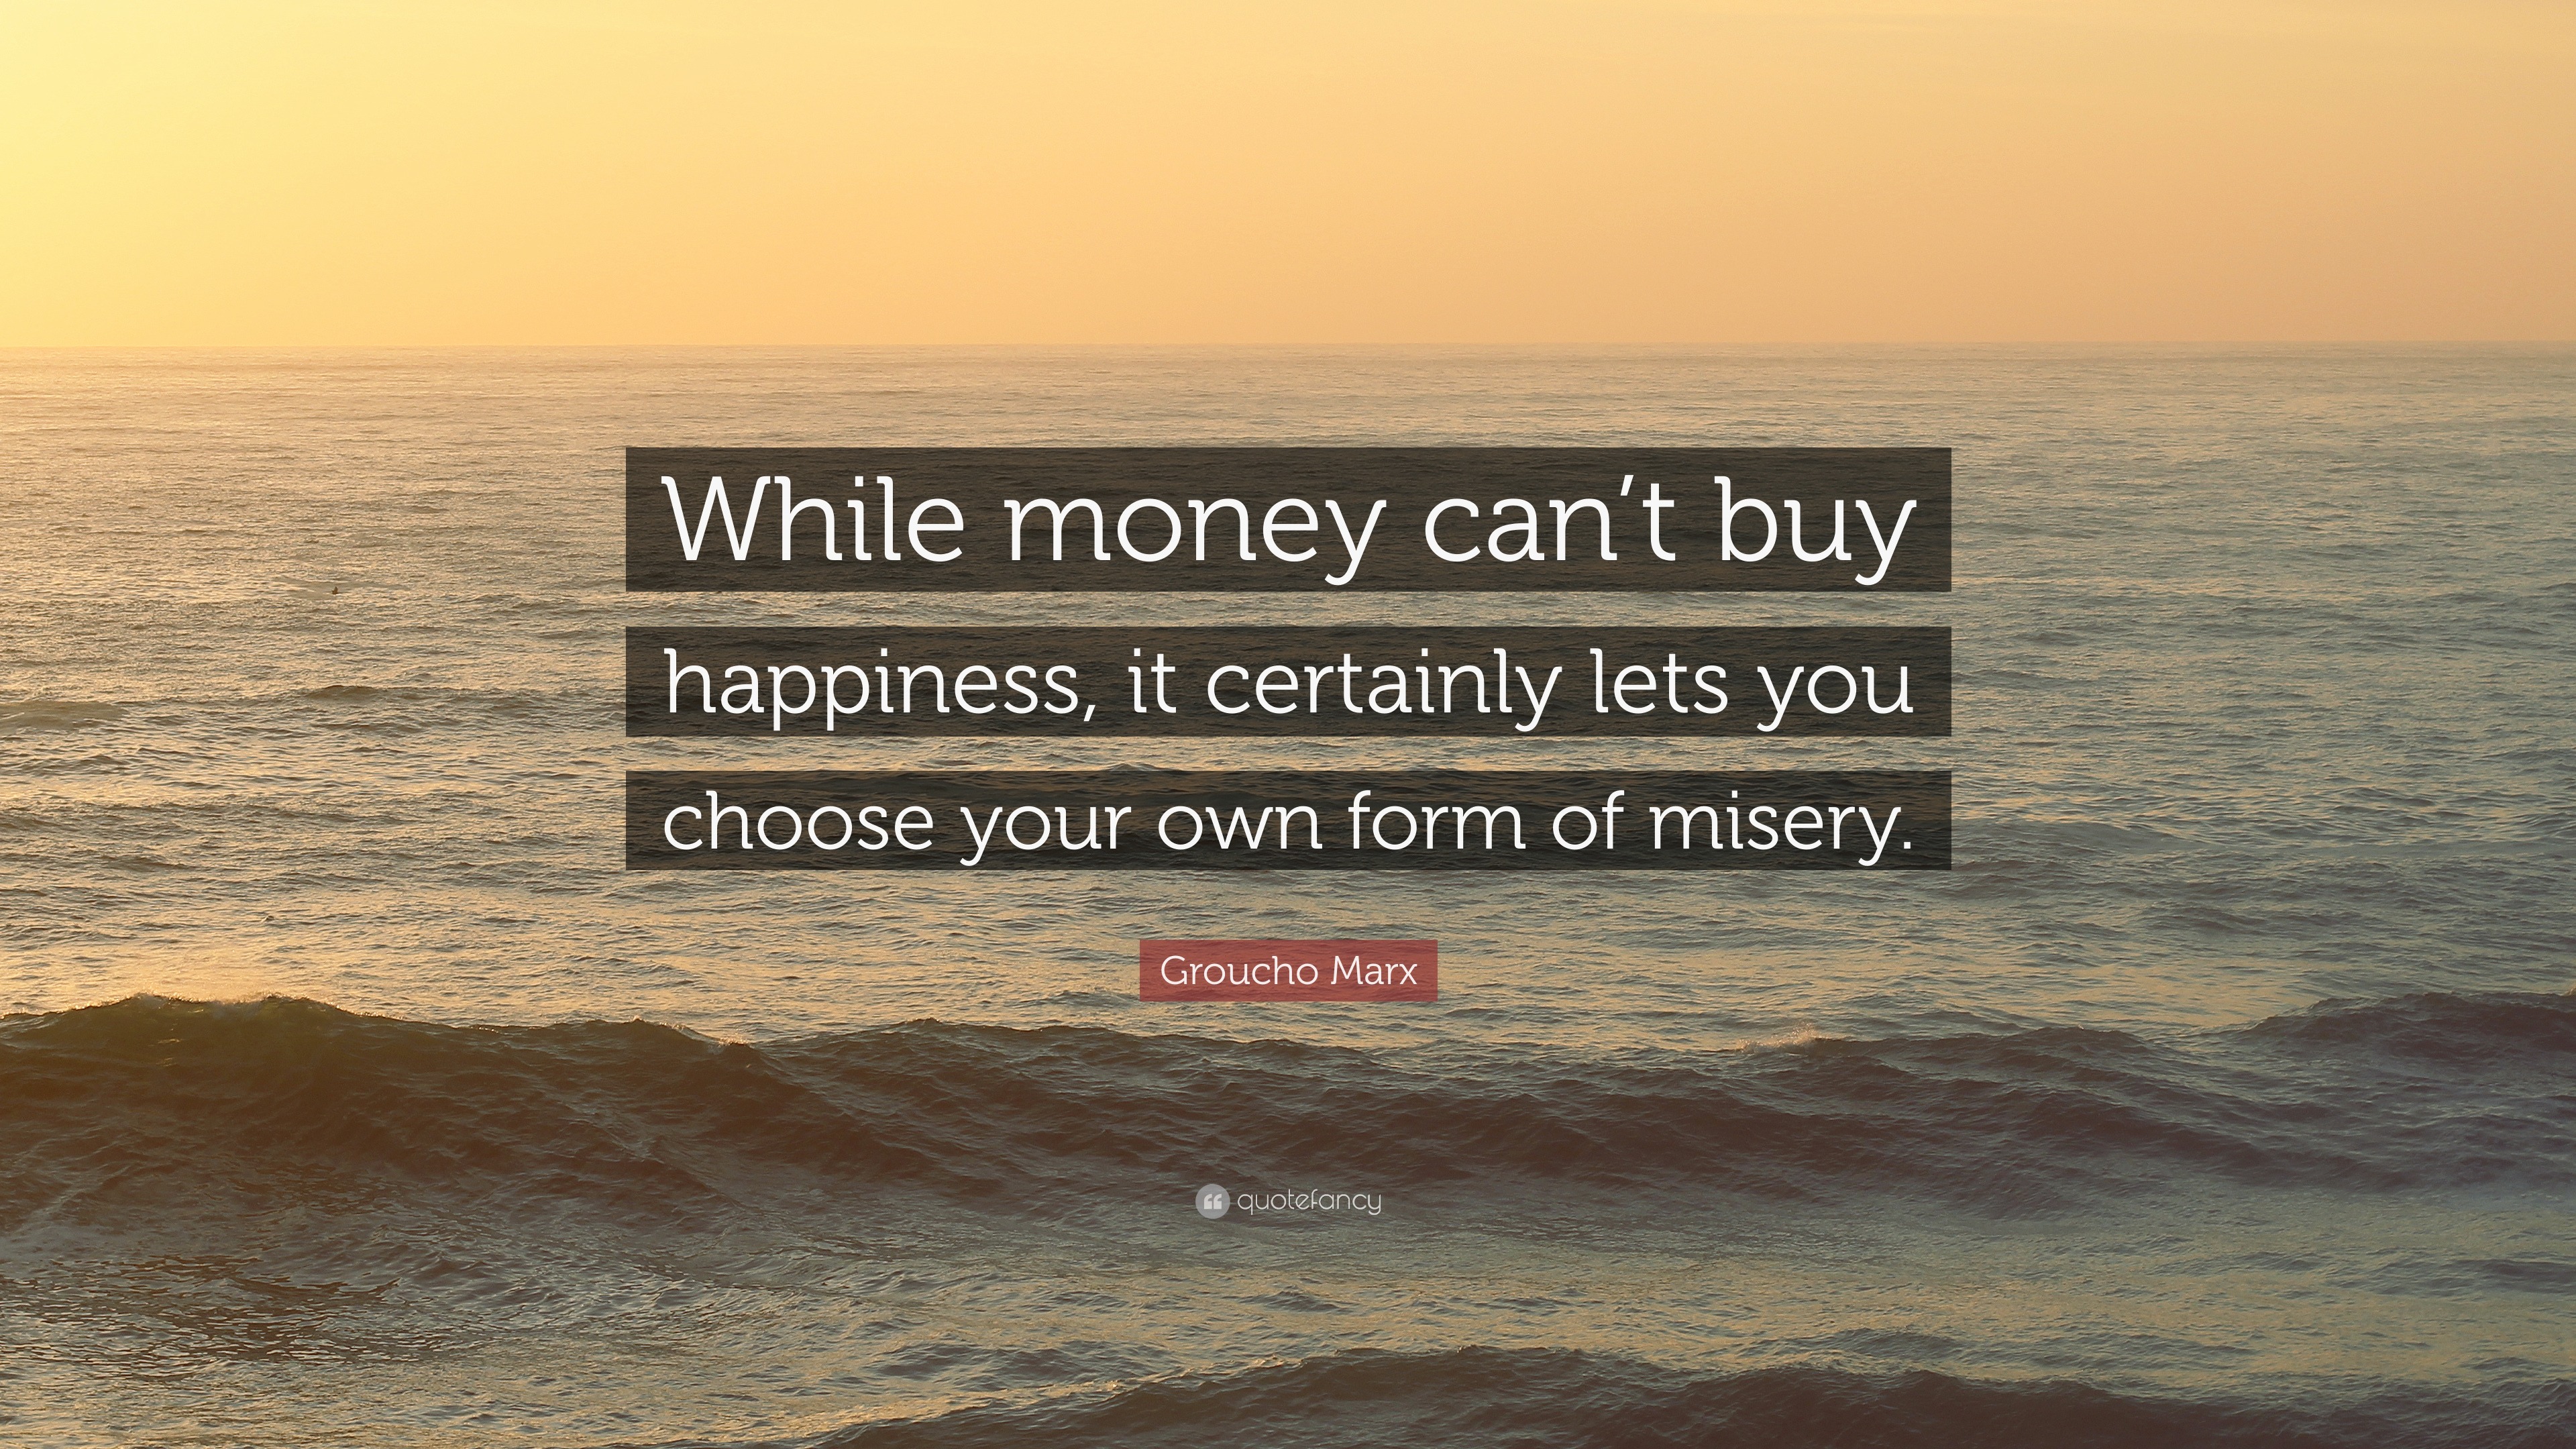 Groucho Marx Quote While Money Can T Buy Happiness It Certainly Lets You Choose Your Own Form Of Misery 10 Wallpapers Quotefancy